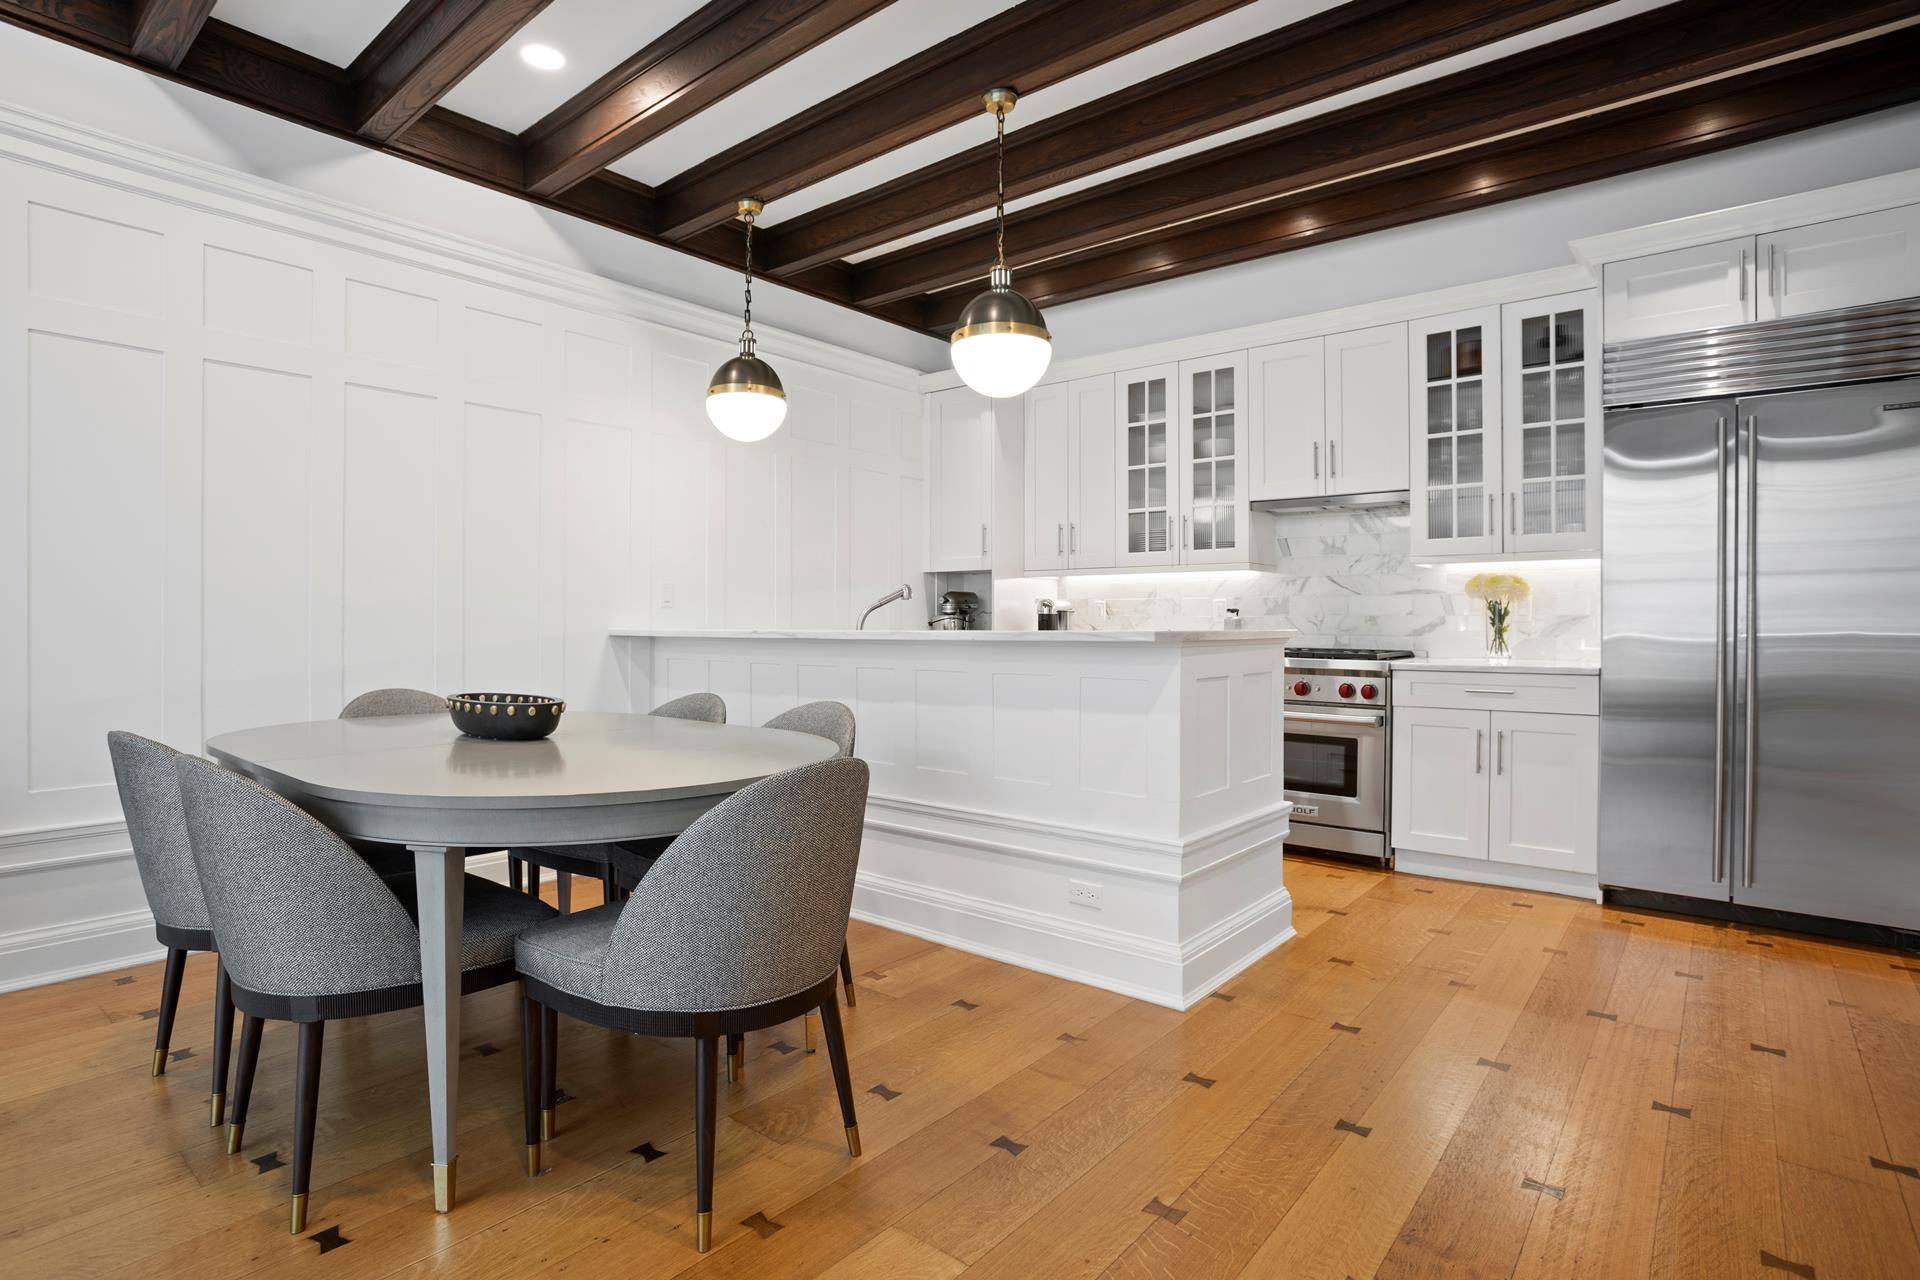 Residence 5 at the coveted Tracy Mansion offers an expansive three bedroom, two bath home that is located one block from Prospect Park in North Park Slope.